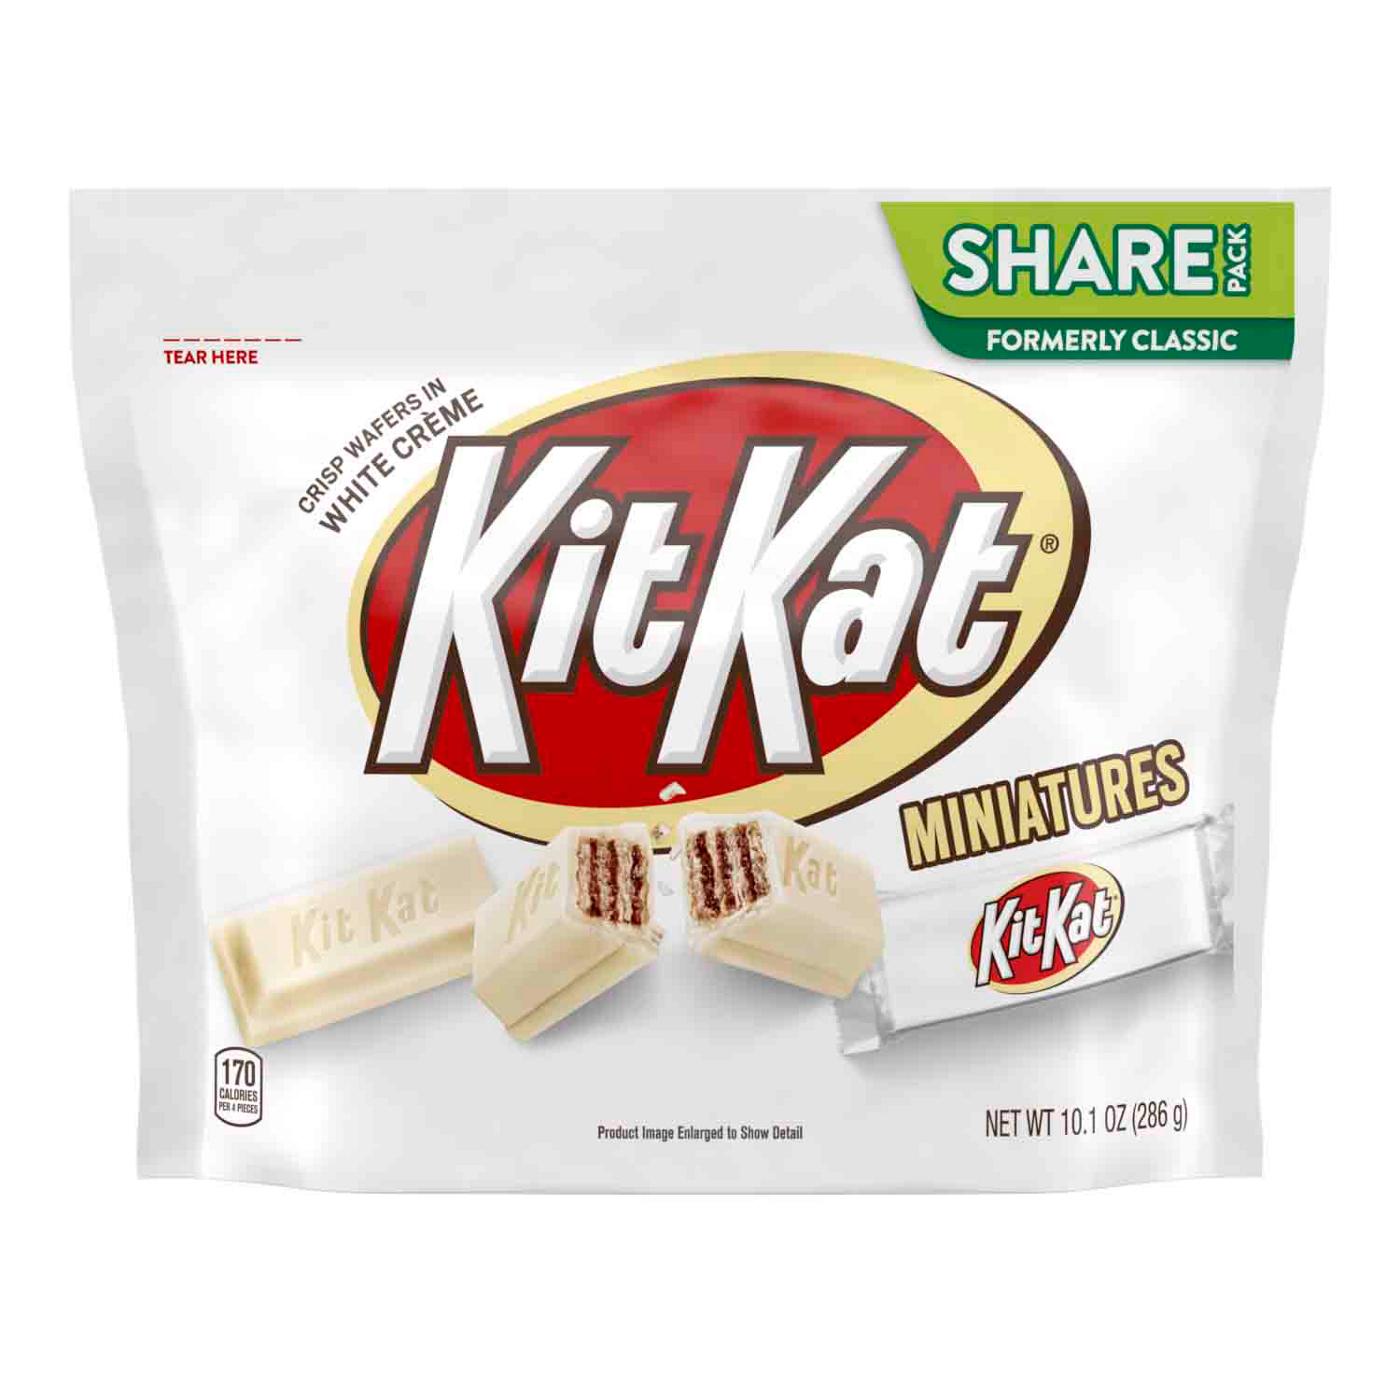 Kit Kat White Miniatures Wafer Bars Candy; image 1 of 2